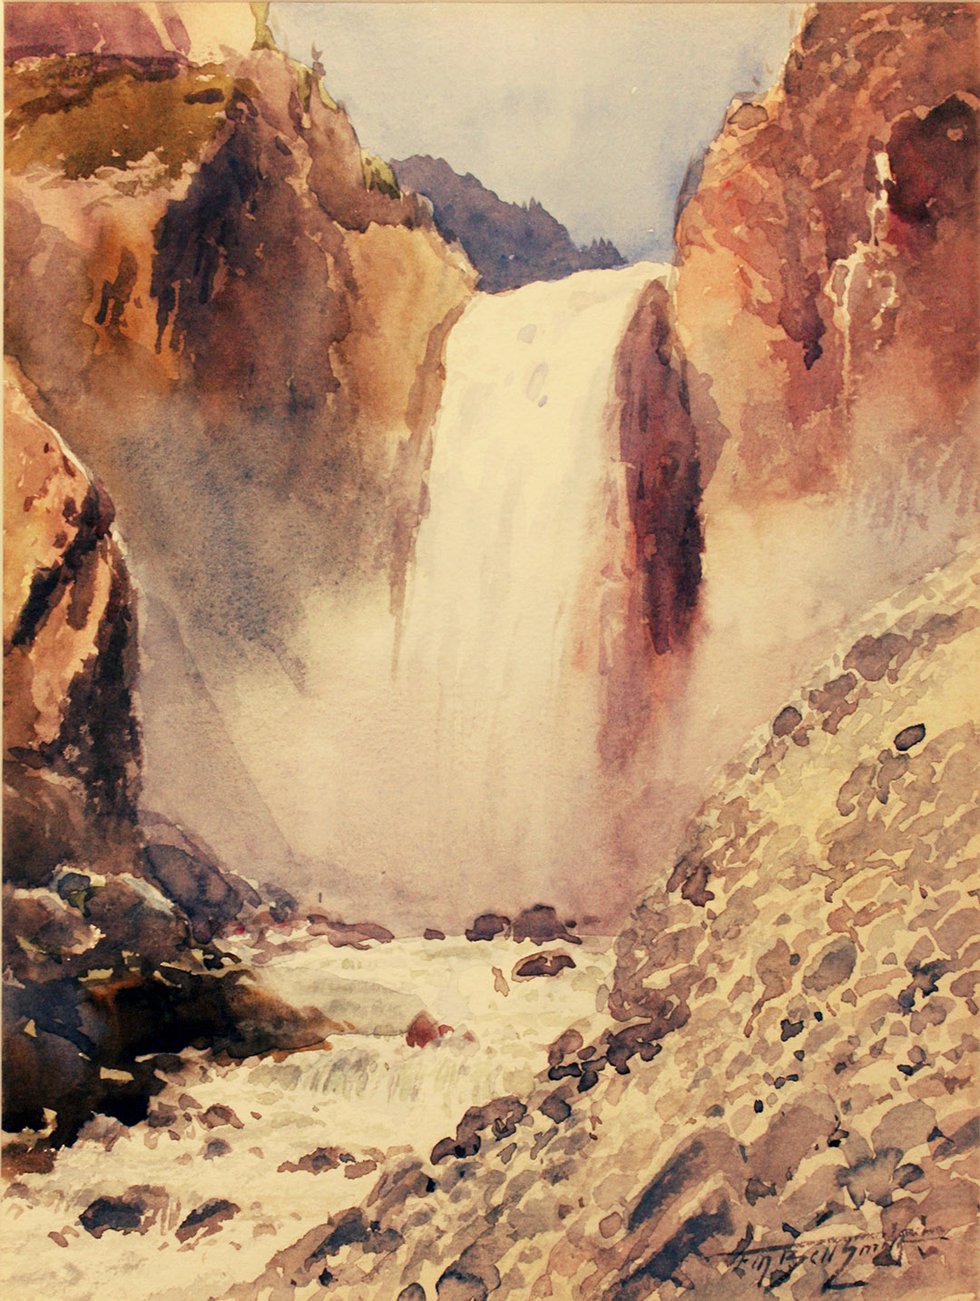 Frederic Marlett Bell-Smith, "Waterfall in the Canadian Rockies," circa 1890